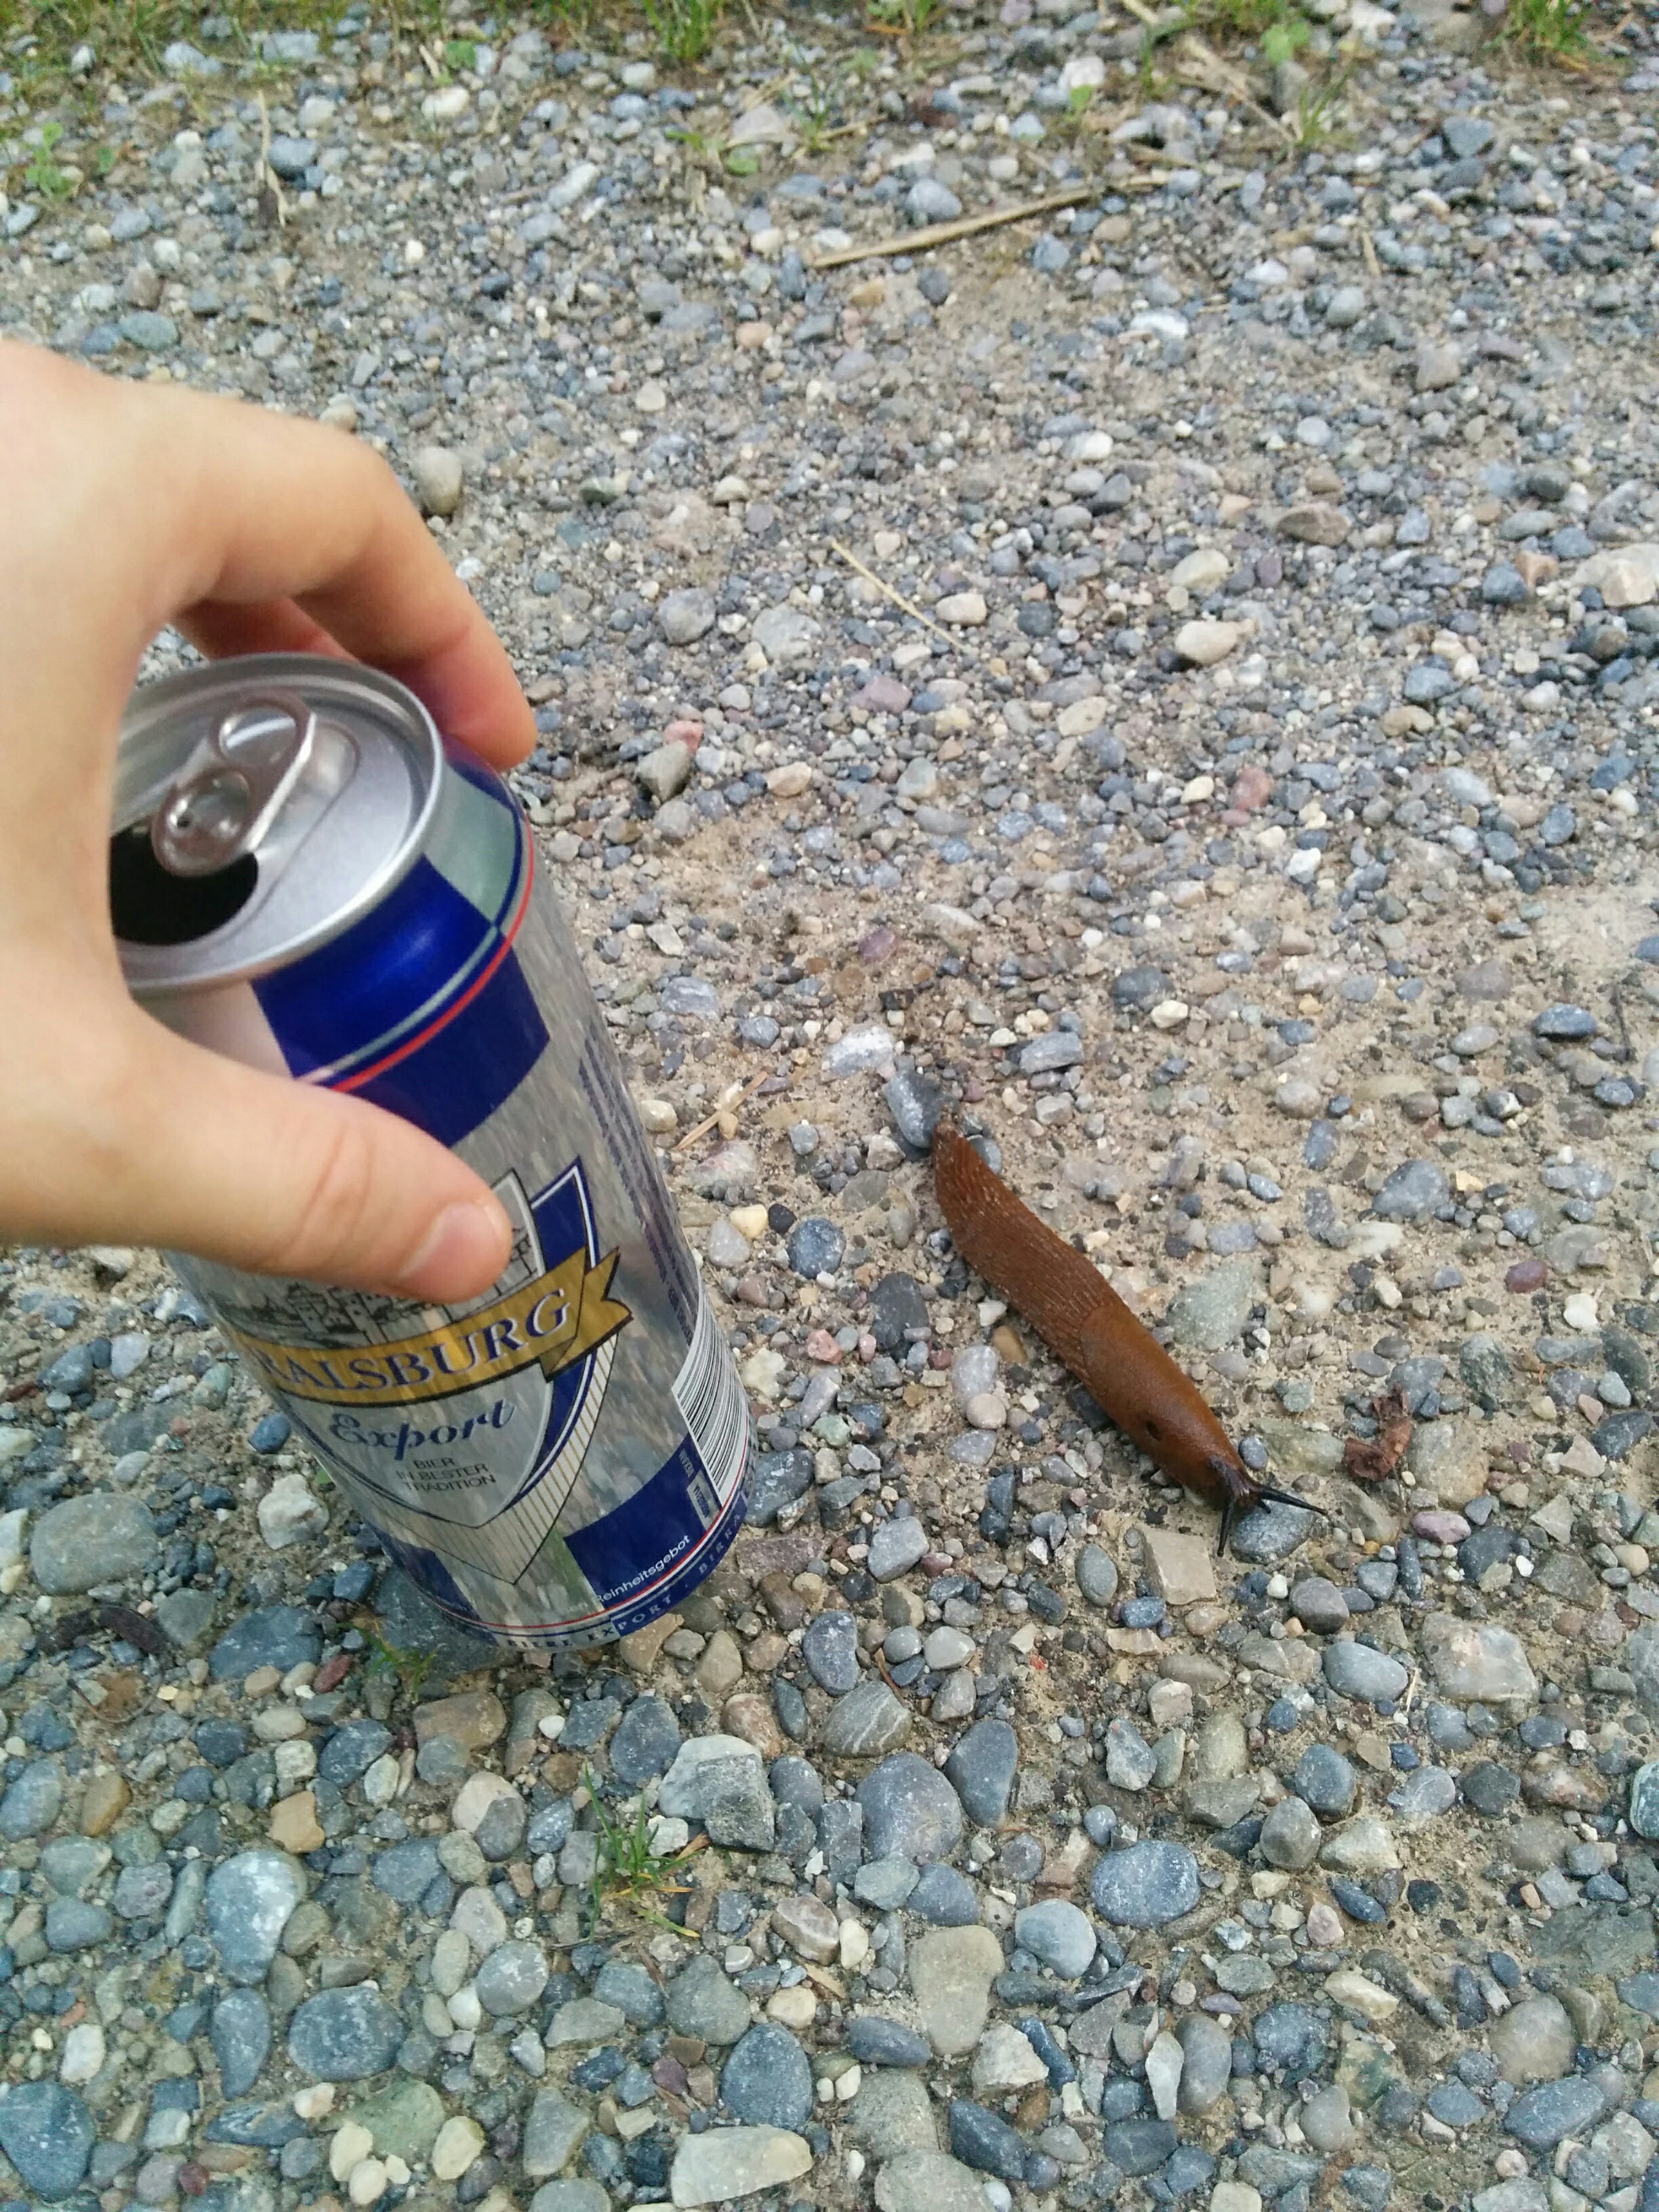 We found this massive slug on one of the trails. Beer can for scale.